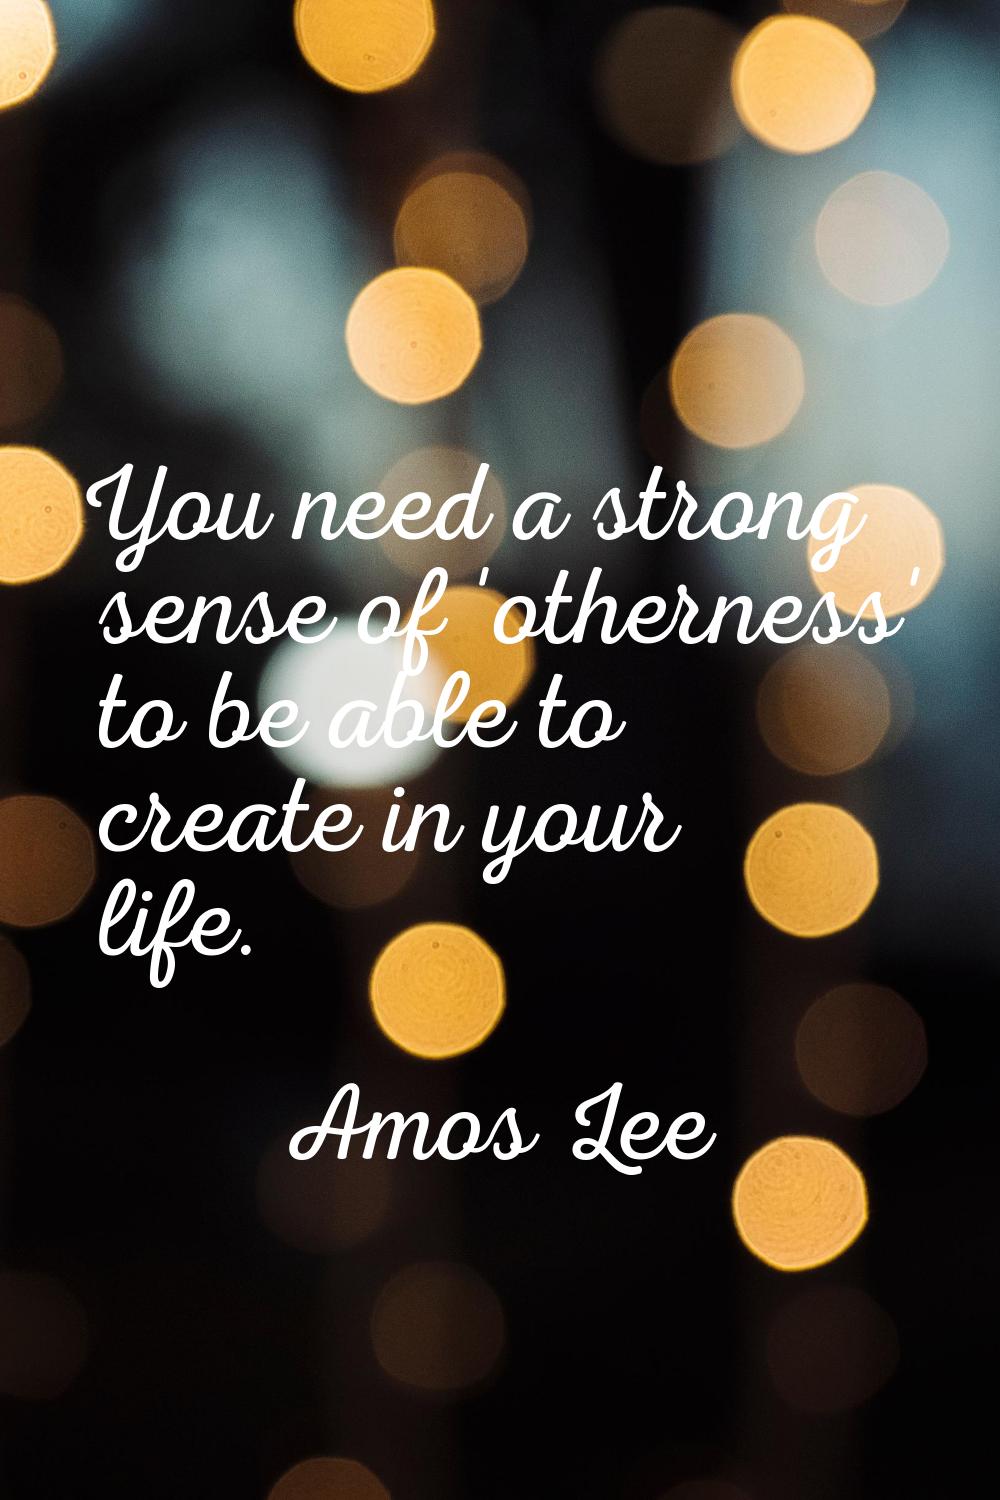 You need a strong sense of 'otherness' to be able to create in your life.